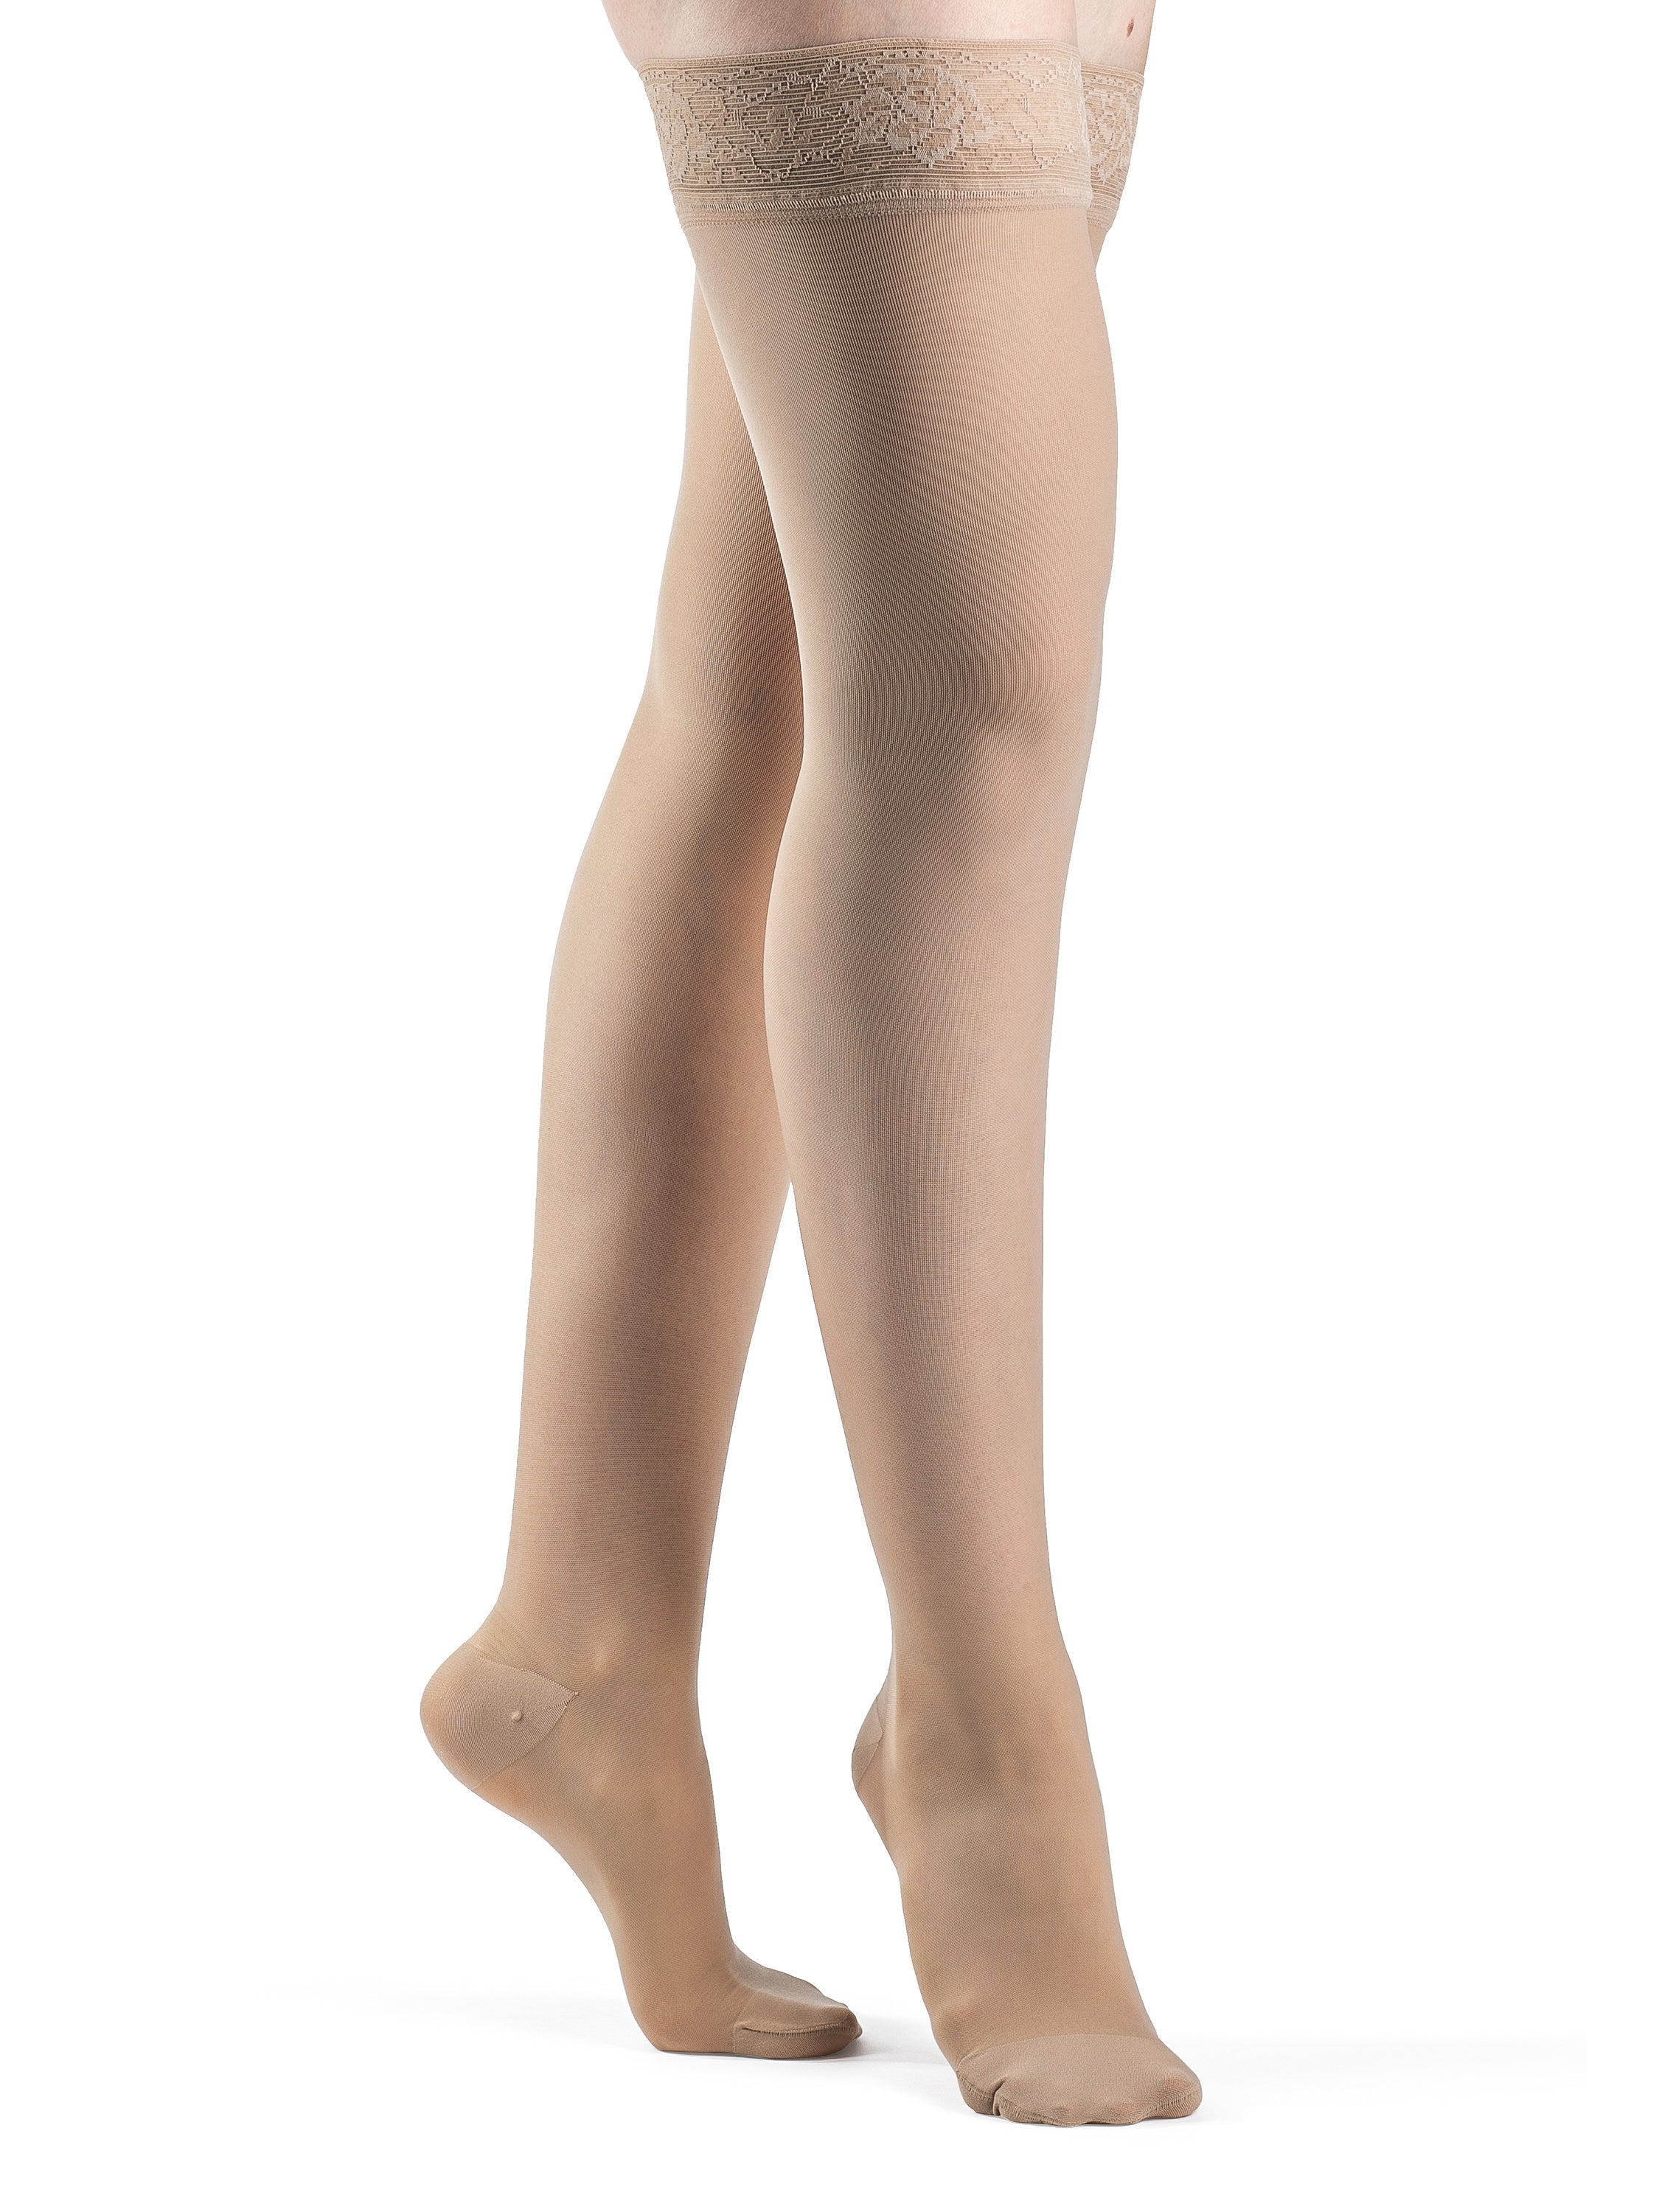 Sigvaris Women's Style Sheer Thigh Highs CLOSED Toe